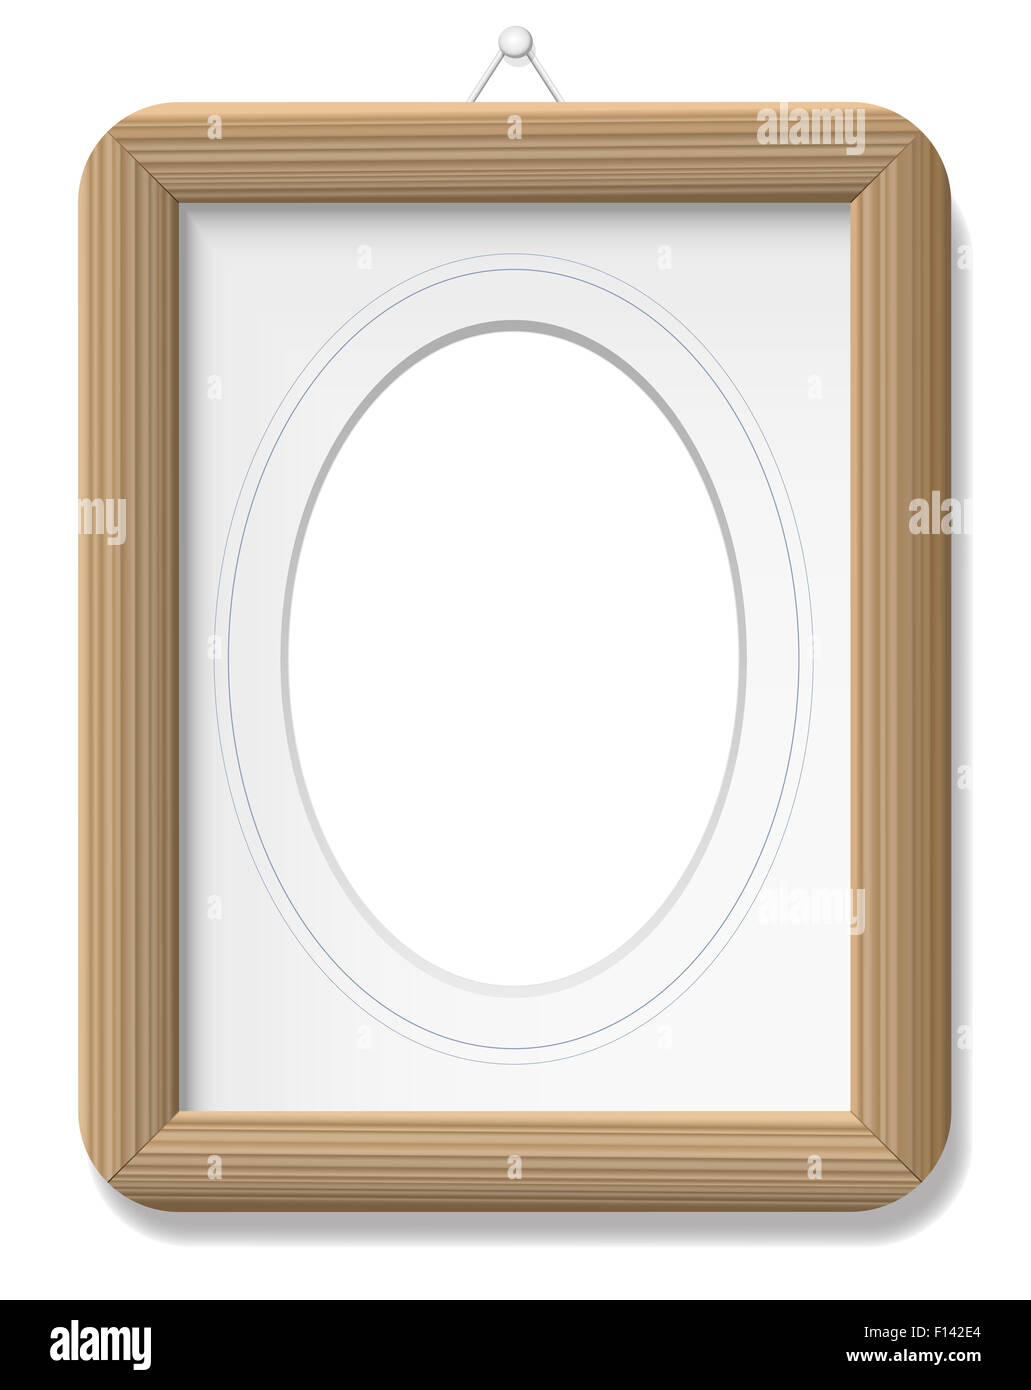 Photo frame - wooden vintage style with mat and french lines. Illustration on white background. Stock Photo